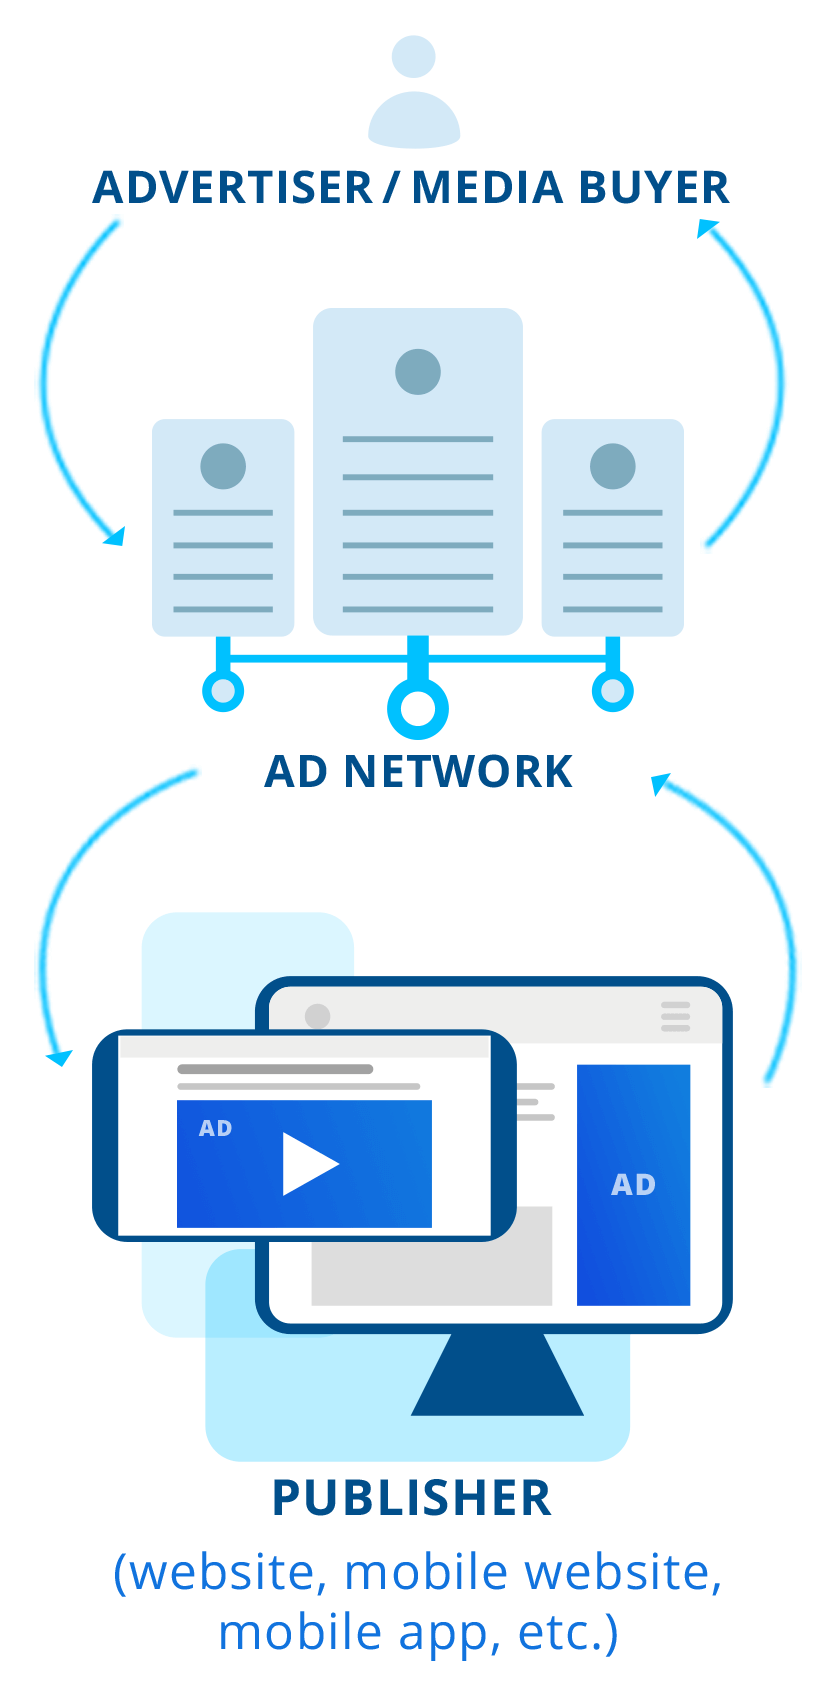 Advertising Networks in the online advertising ecosystem